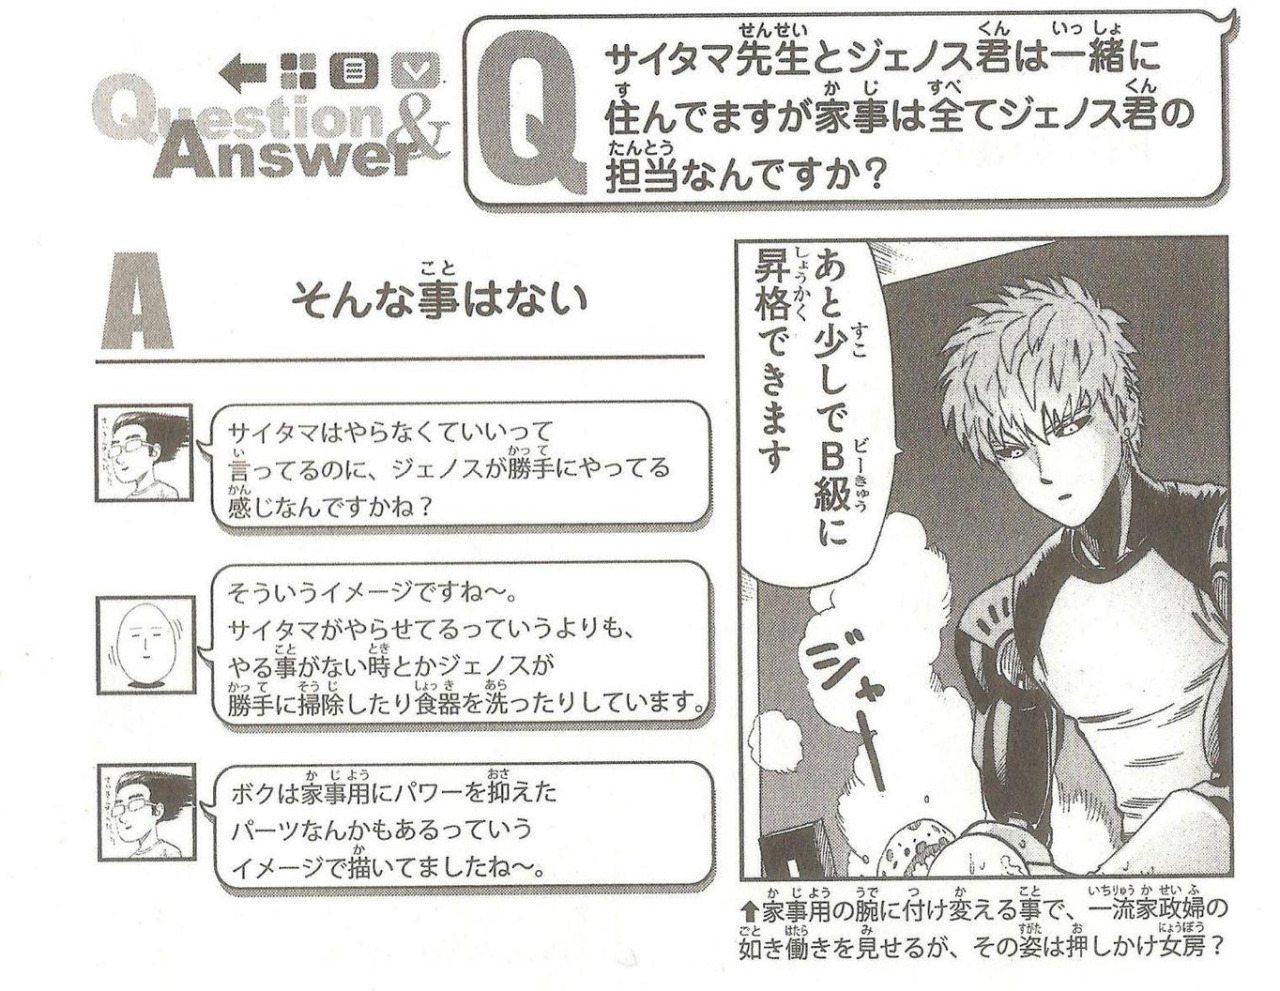 Genos related Q&A in the OPM databook